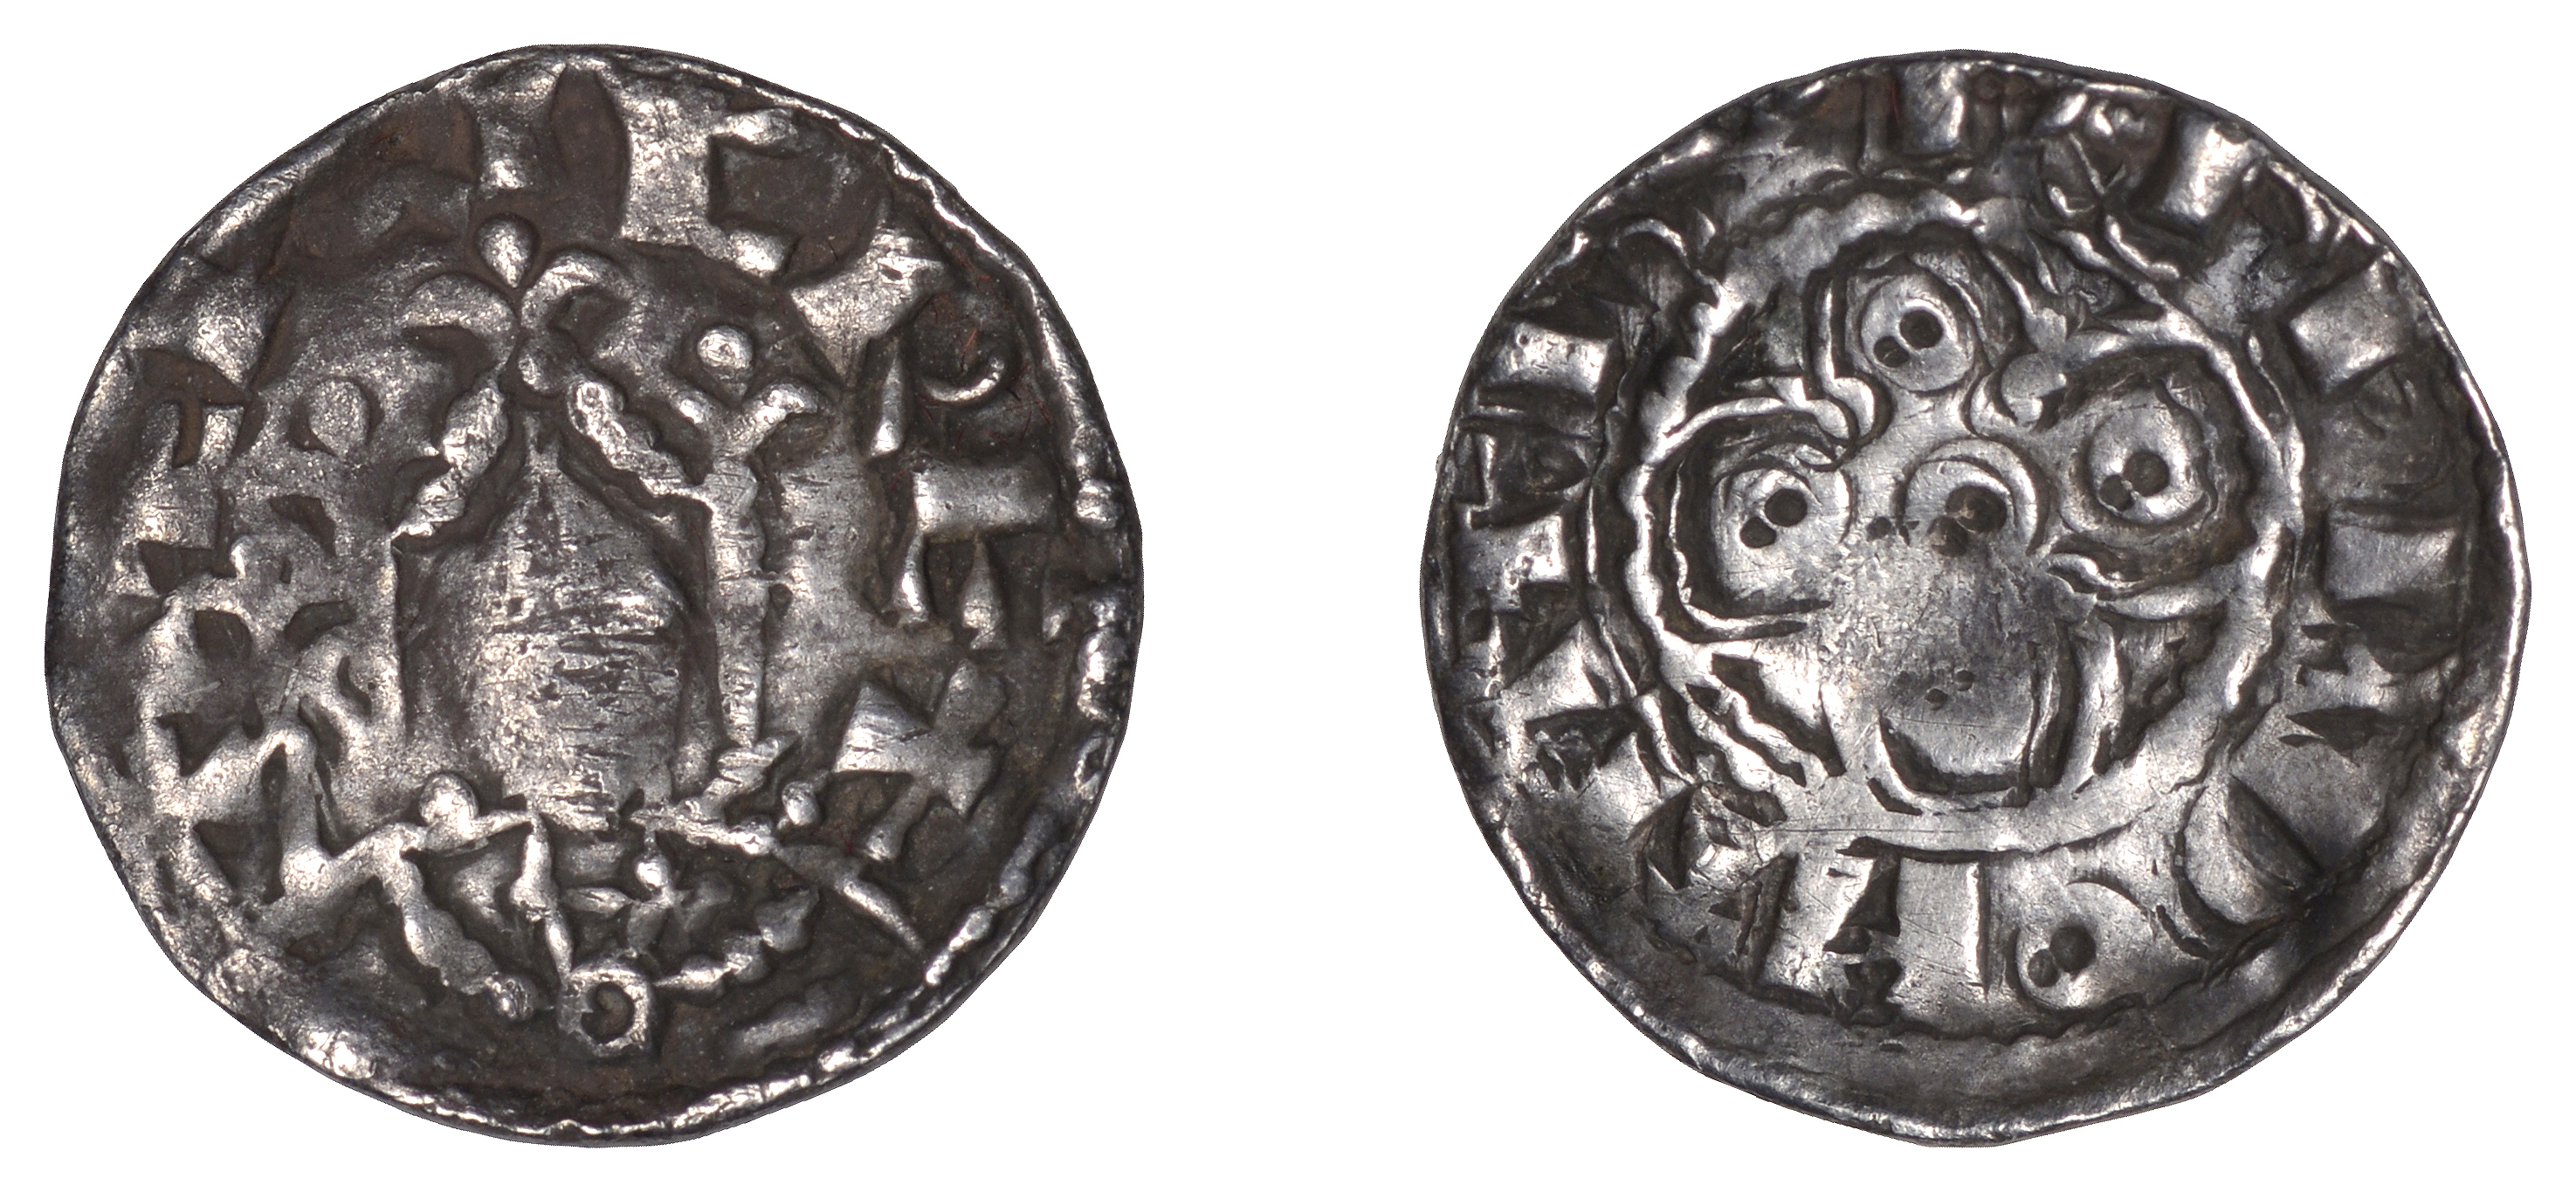 Henry I (1100-1135), Penny, Annulets and Piles type [BMC IV], probably Thetford, Burhard, bv...